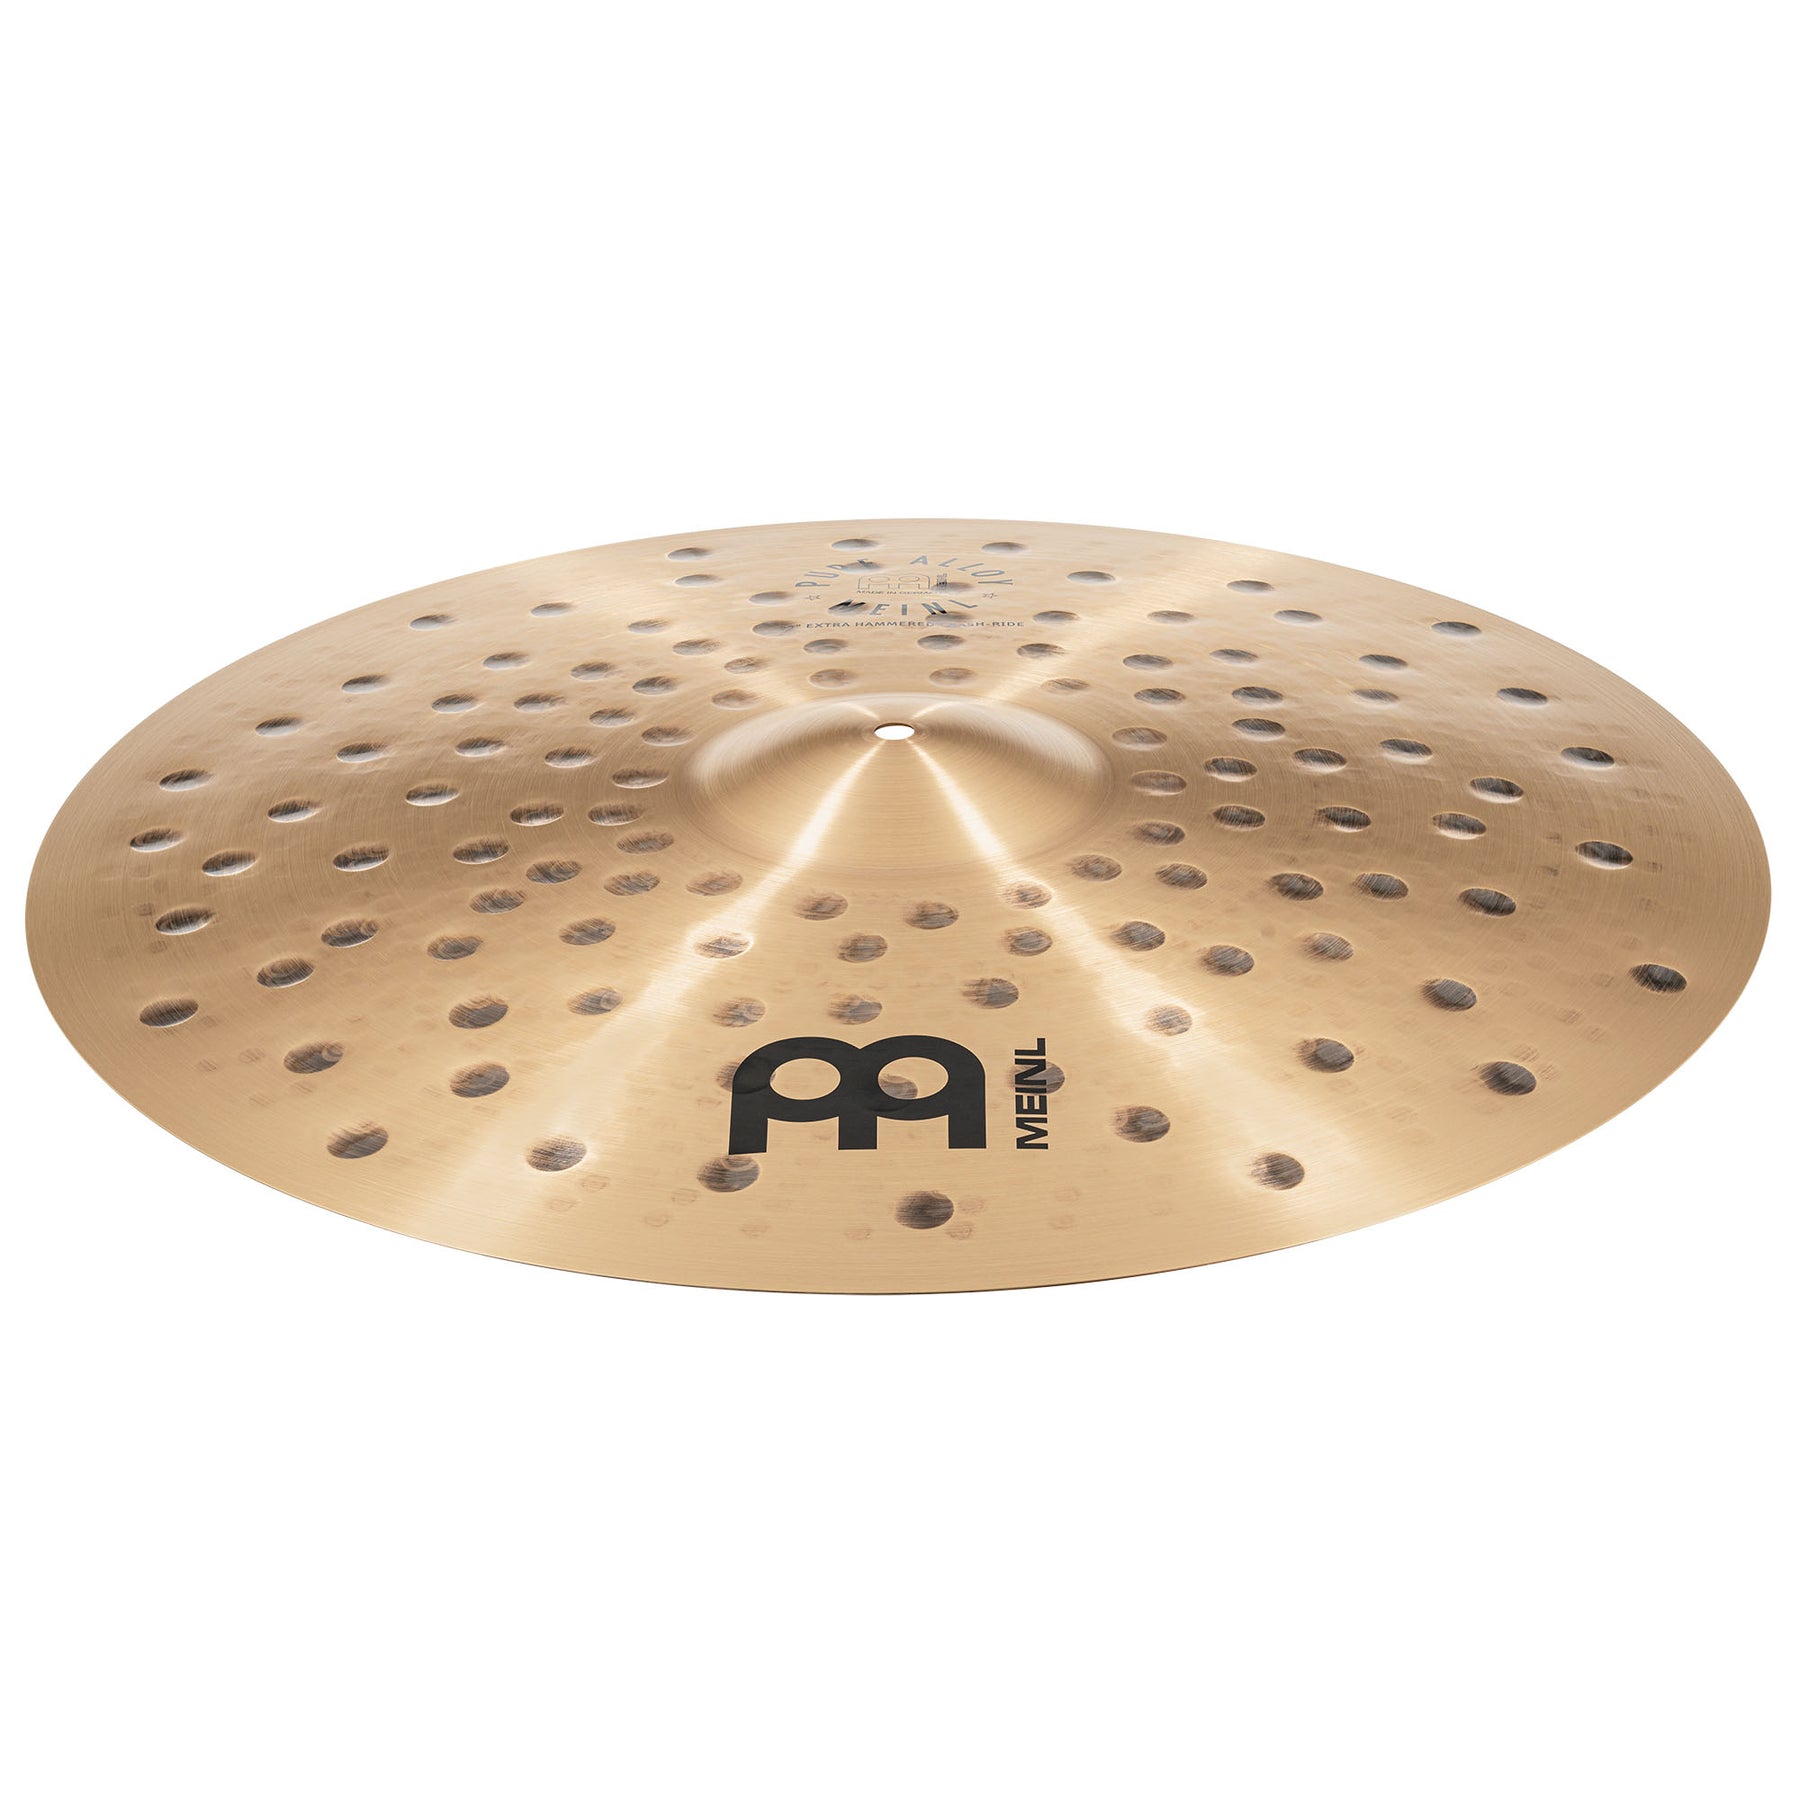 Meinl Pure Alloy Cymbals At Into Music – Into Music Store